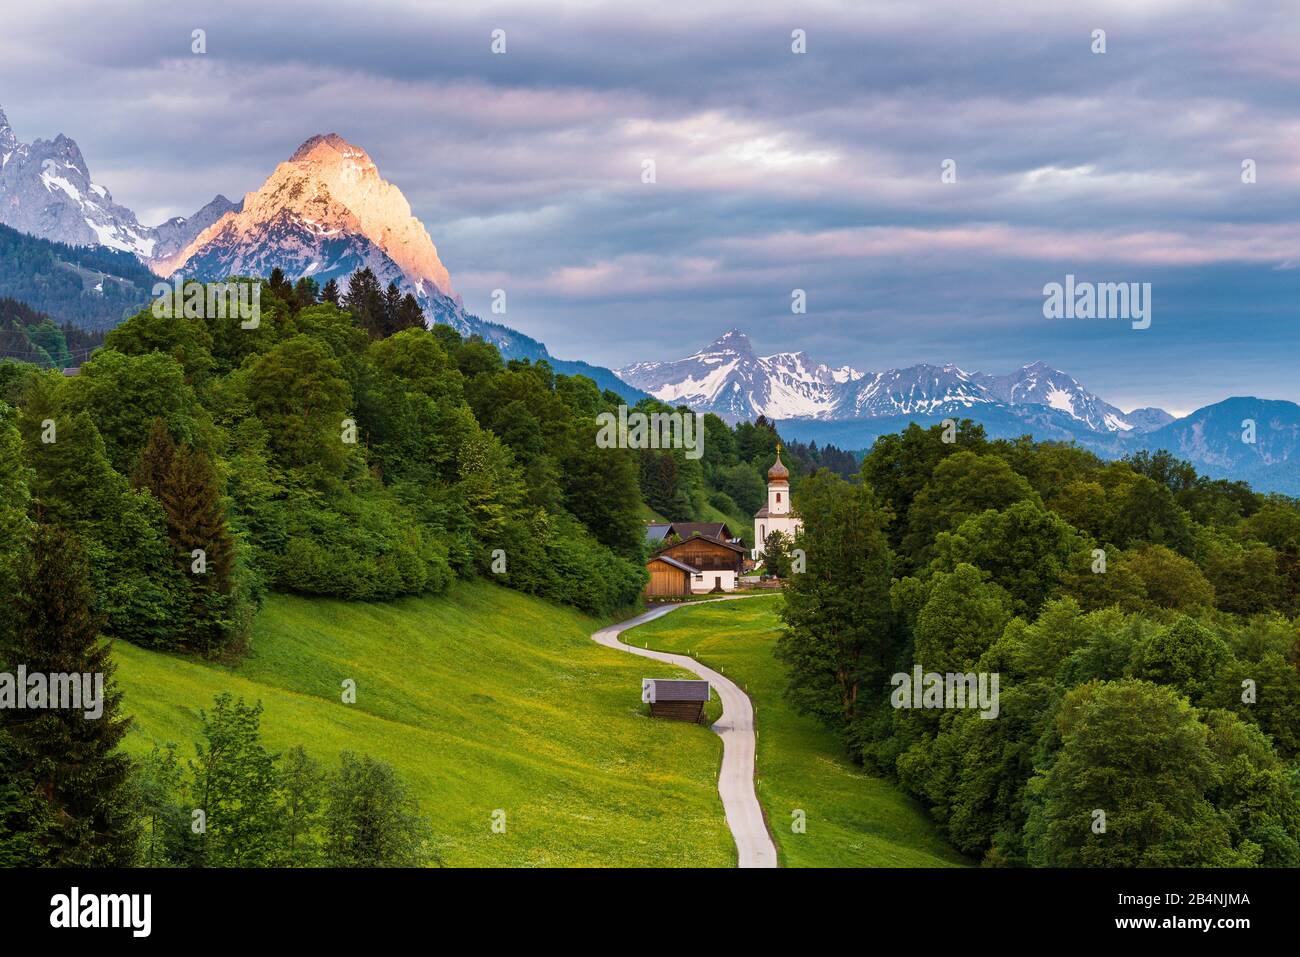 Wamberg with church and view of Wetterstein Mountains, Bavaria, Germany Stock Photo